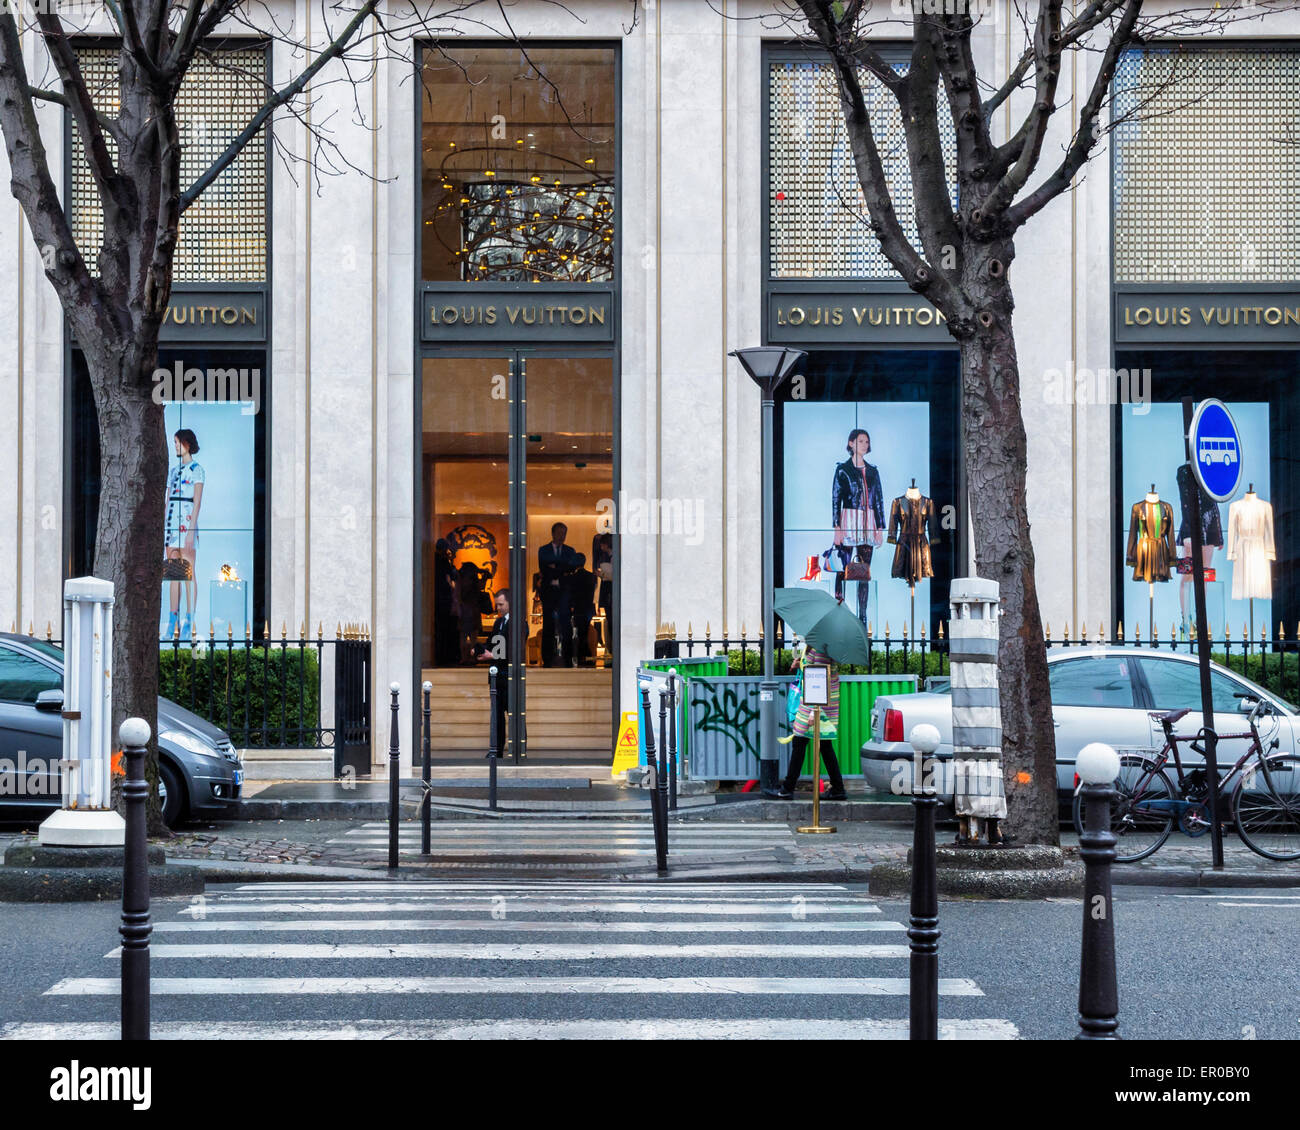 Louis Vuitton store entrance and display windows on Avenue